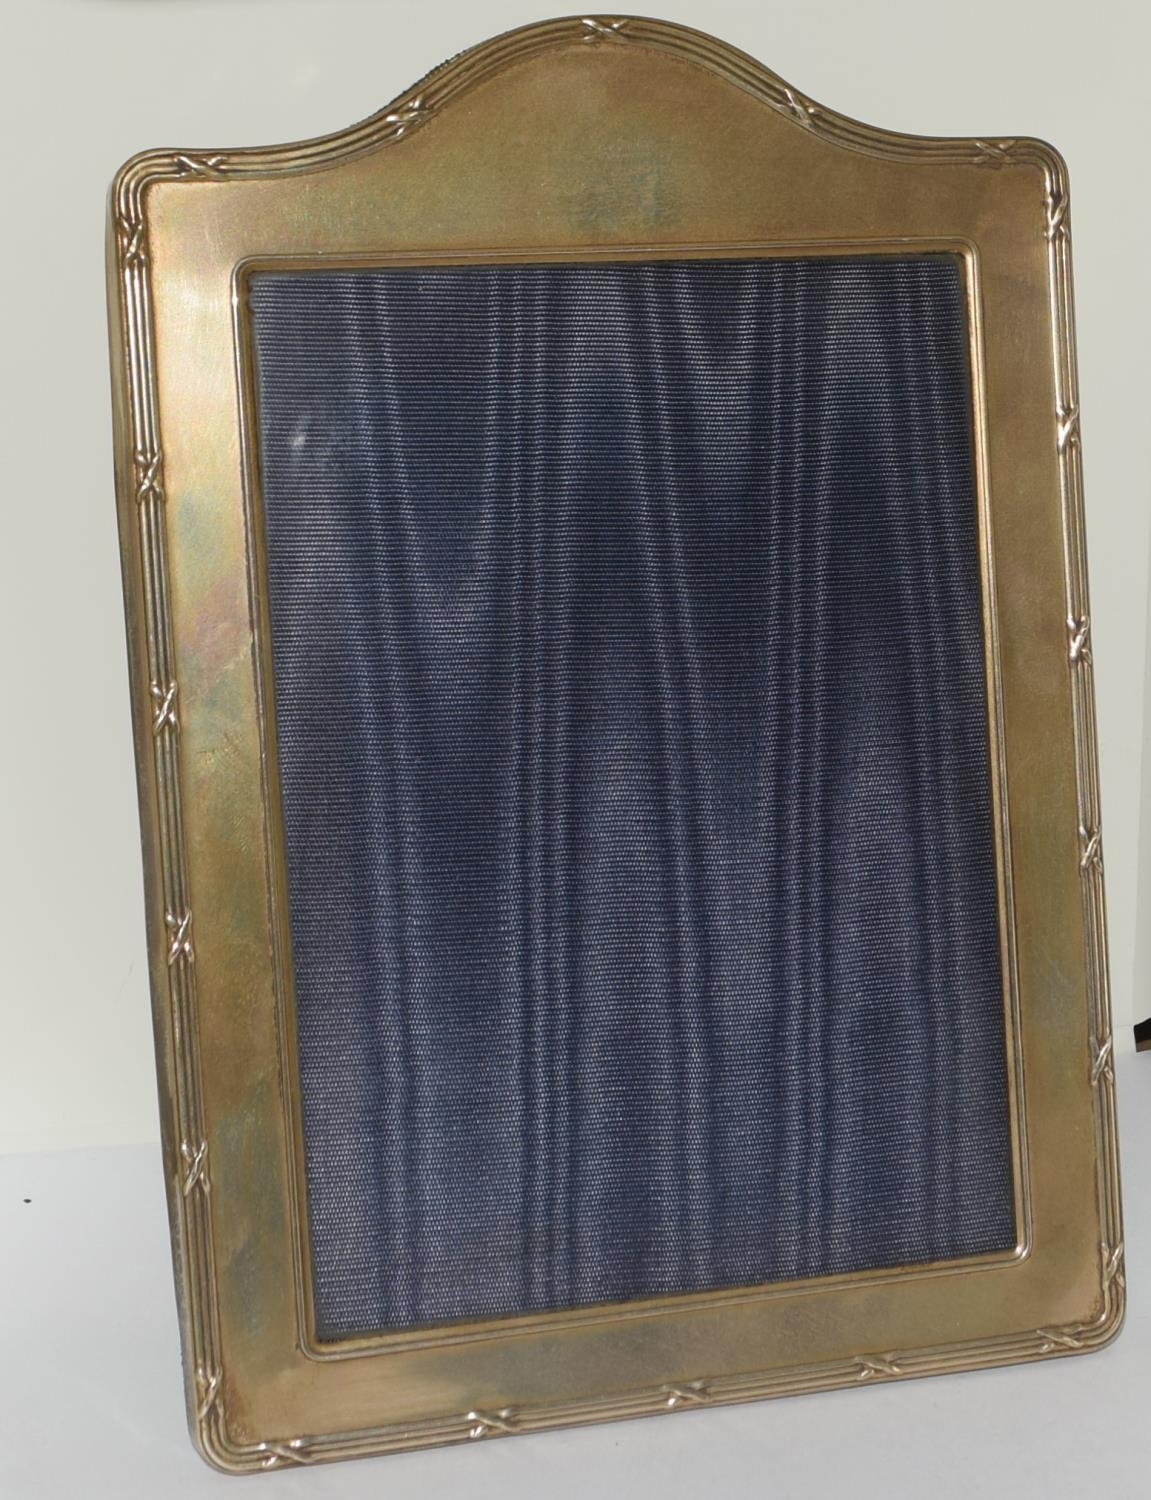 Silver H/M gilded easel back picture frame 19x13cm - Image 7 of 7